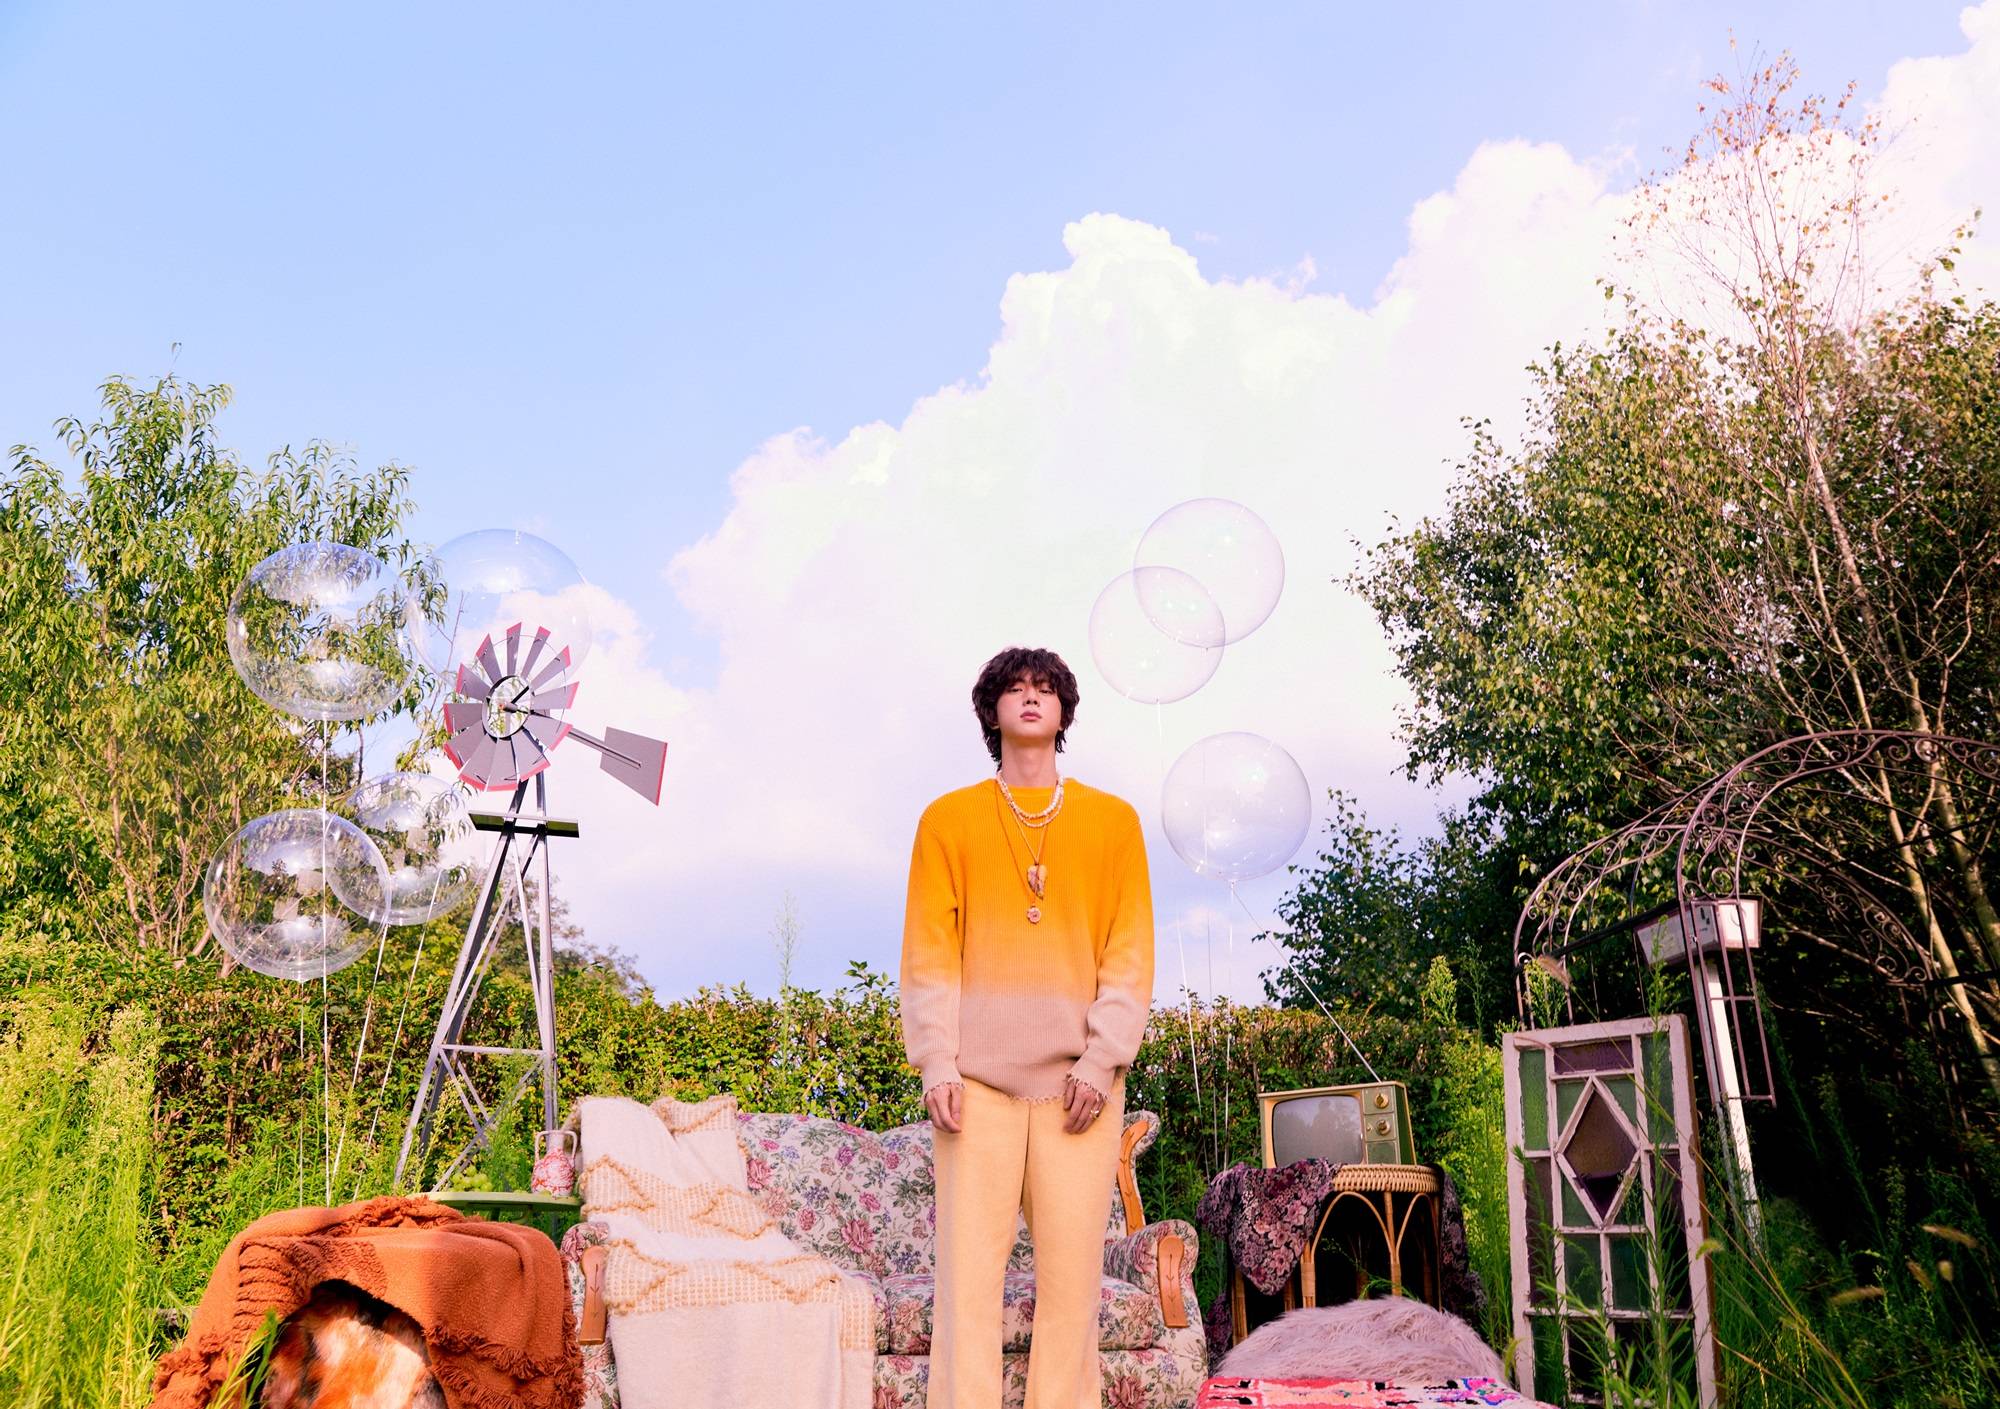 Jin of BTS poses in a sunny farm scene wearing a yellow shirt